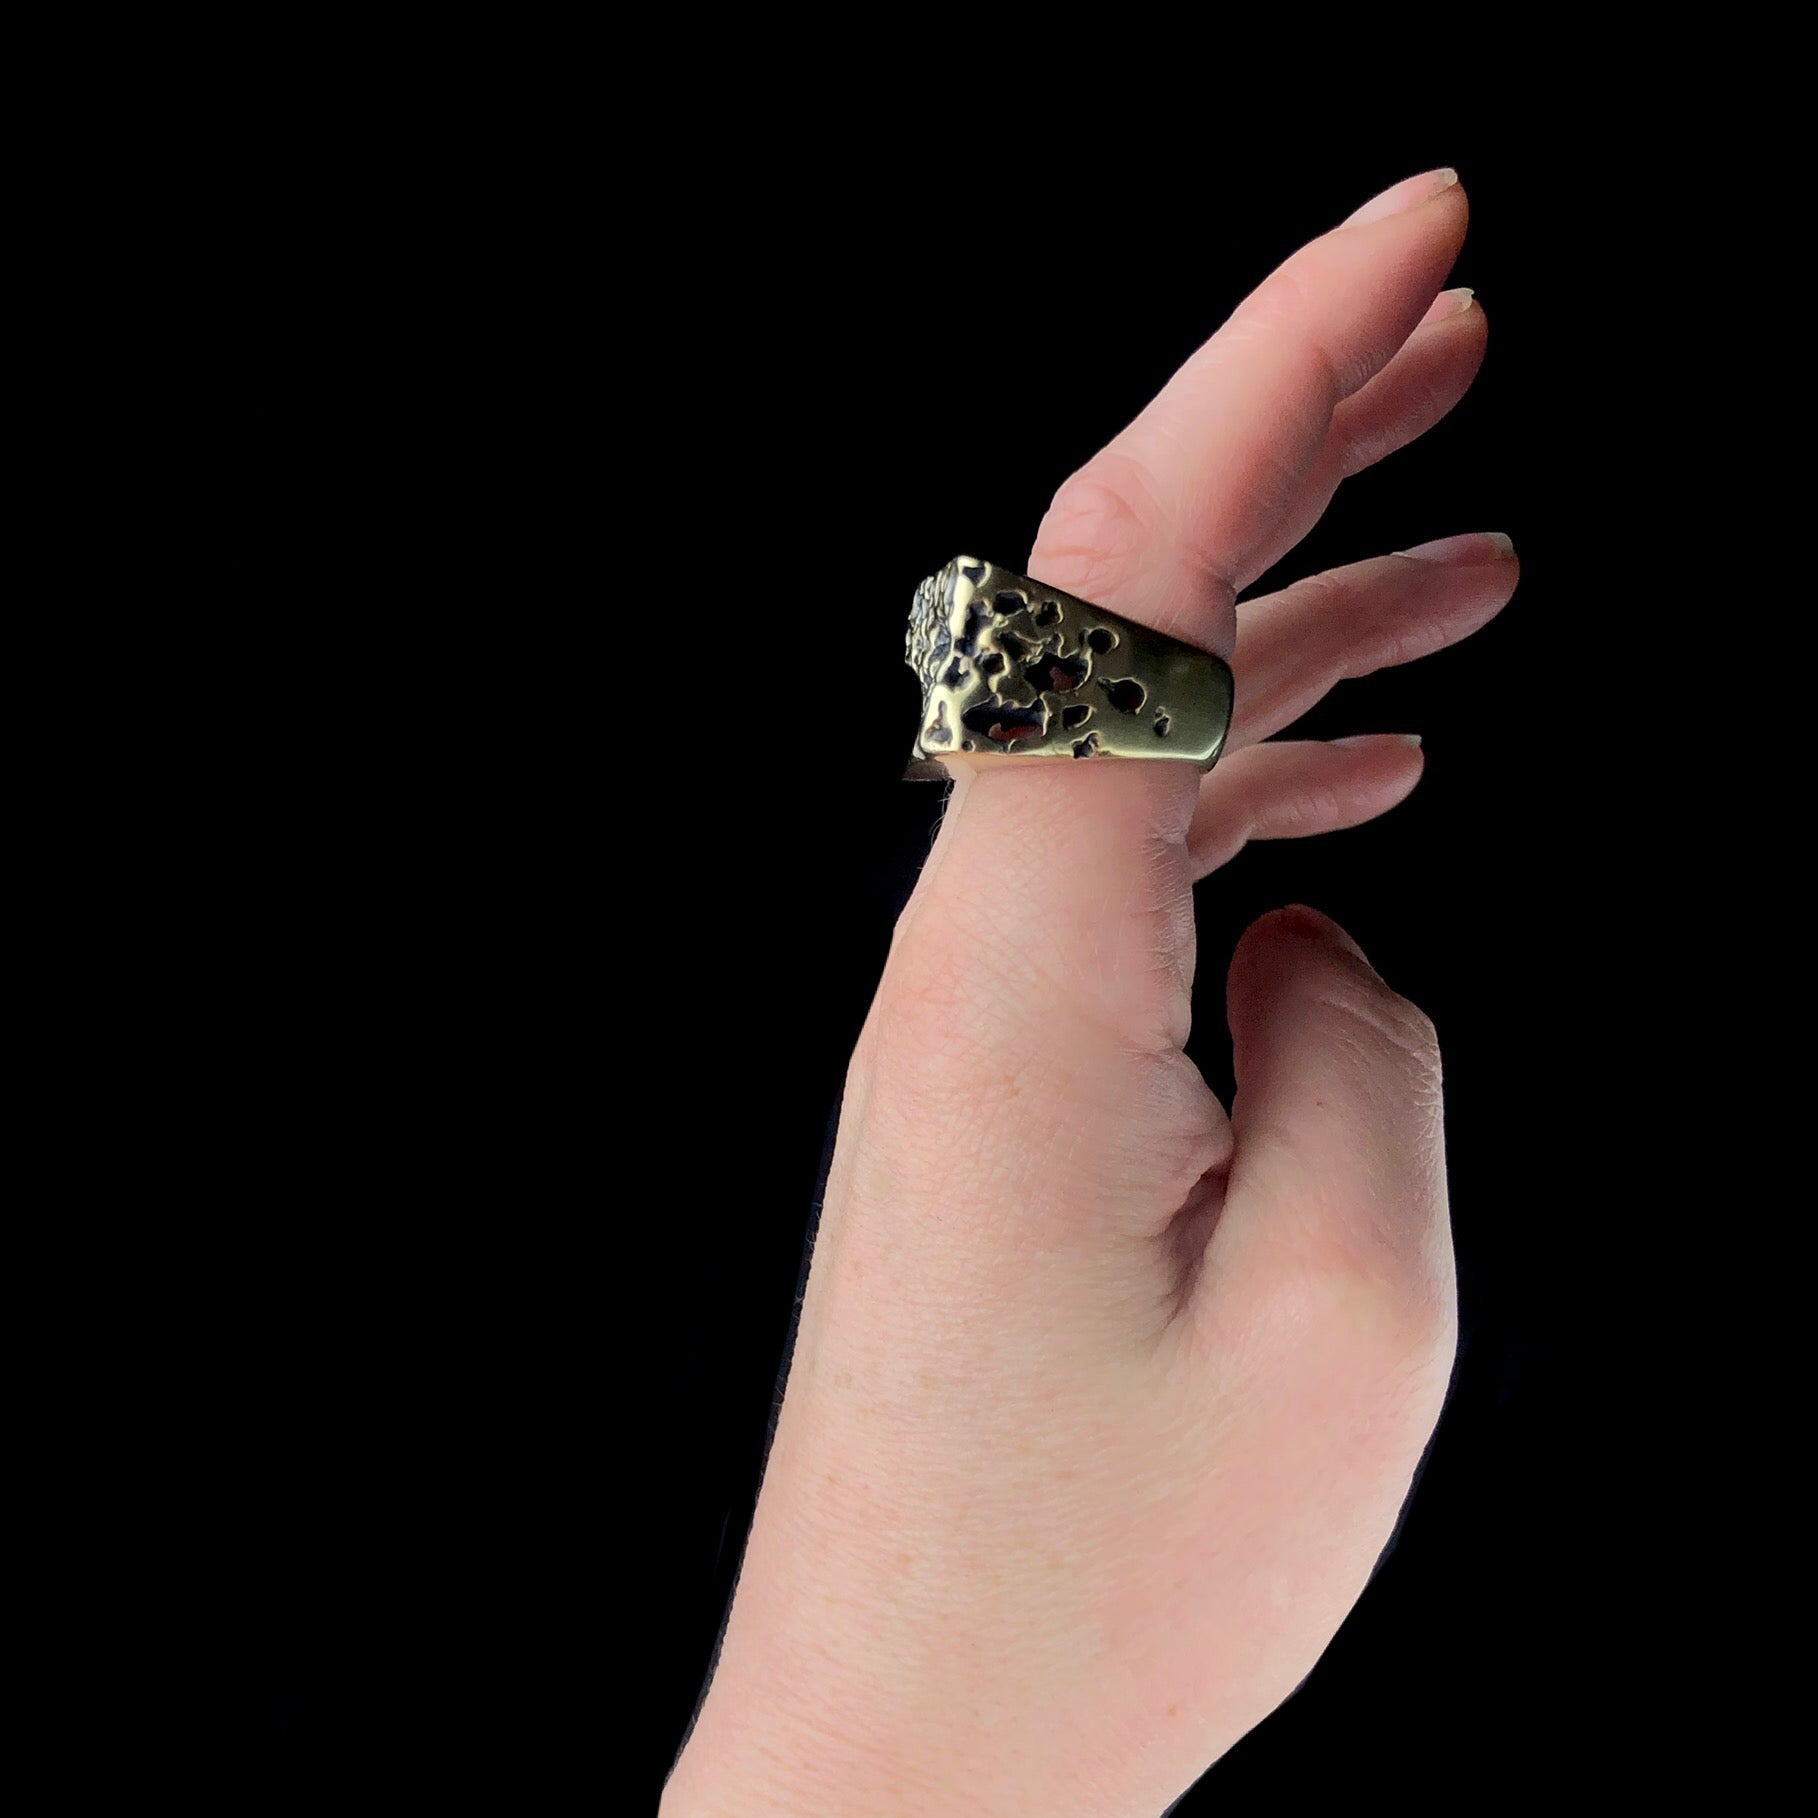 Atoll Ring shown on hand